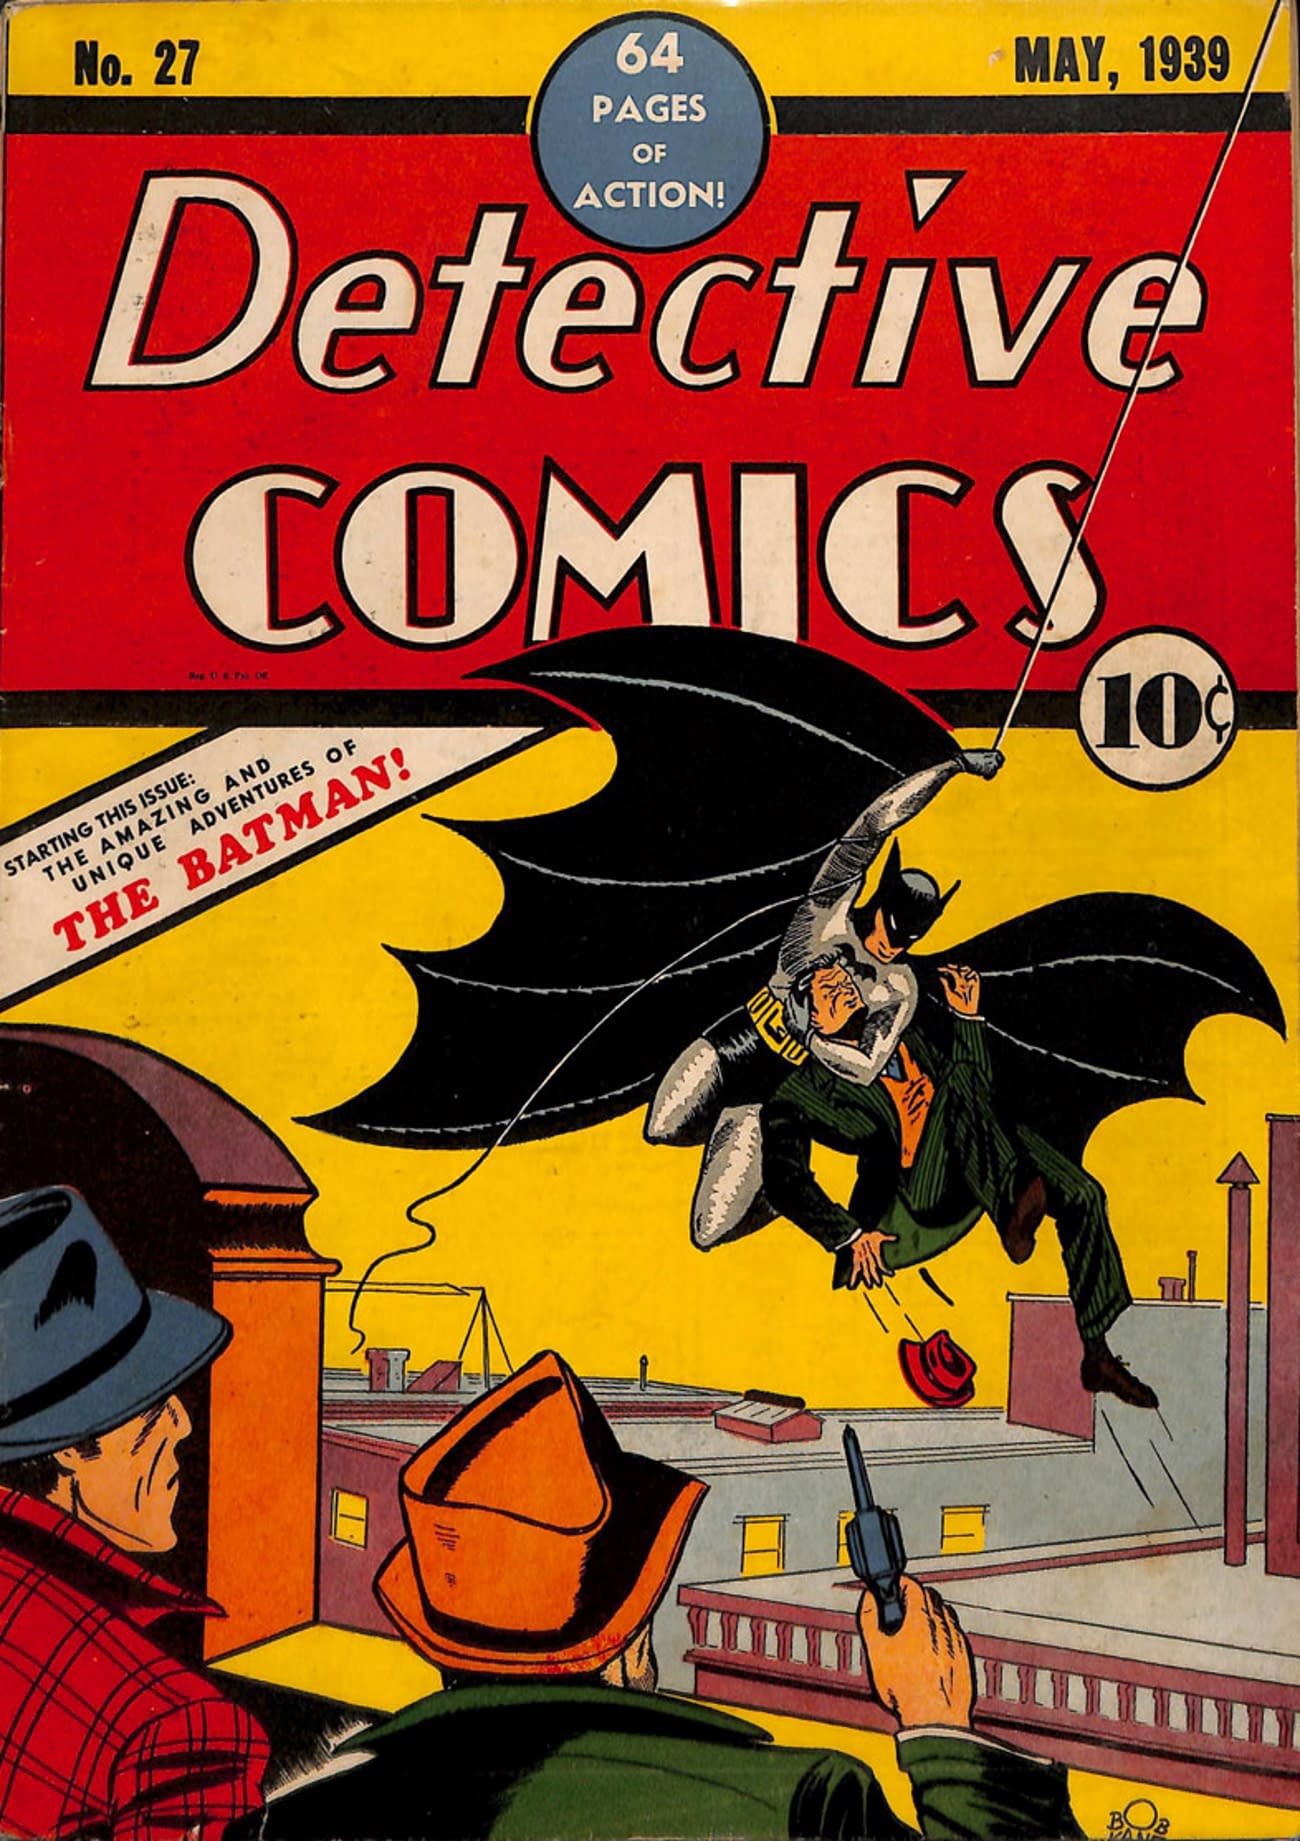 The Bad Guy On The Cover of Detective Comics #27 Finally Gets A Name